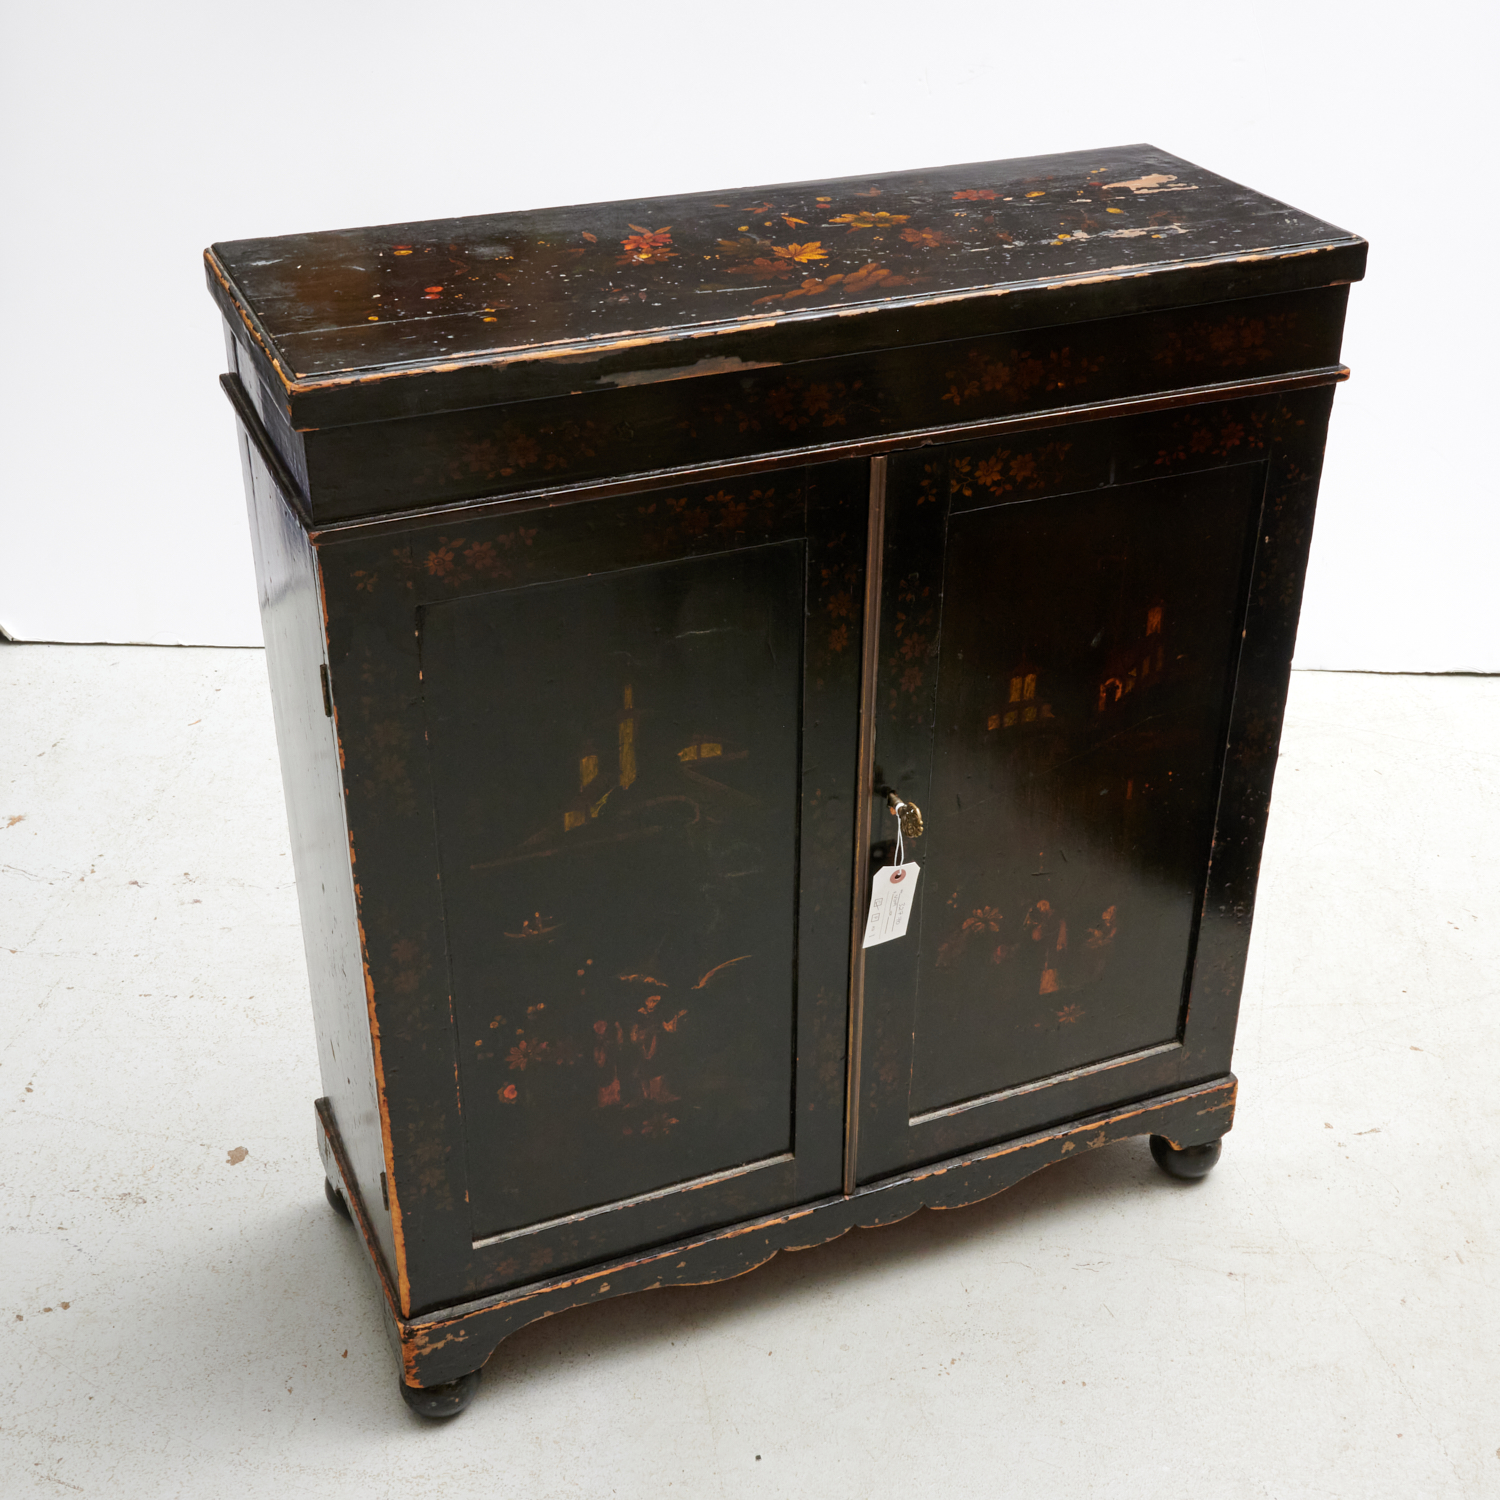 VINTAGE CHINOISERIE LACQUERED CABINET